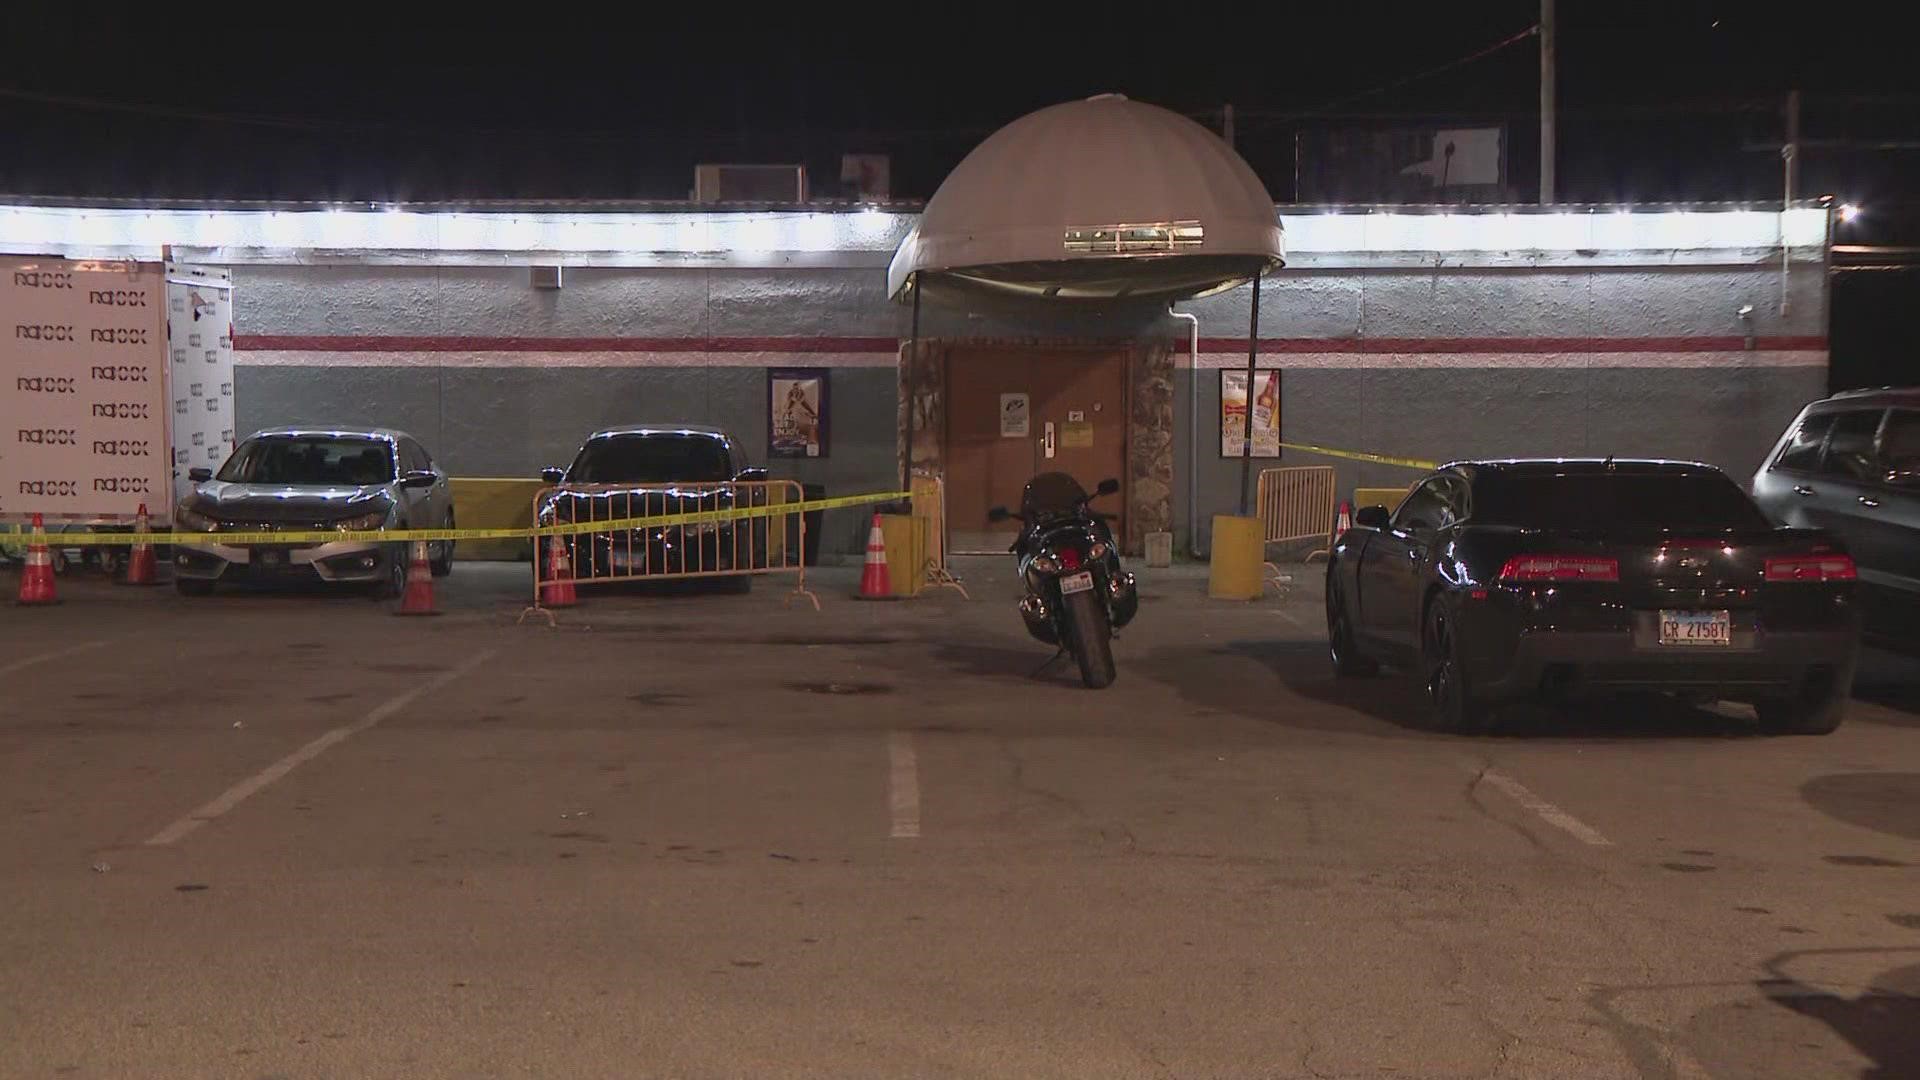 A person is in the hospital after a shooting Friday outside Roxy's, a nightclub in Brooklyn, Illinois. Police have not released additional details about the shooting